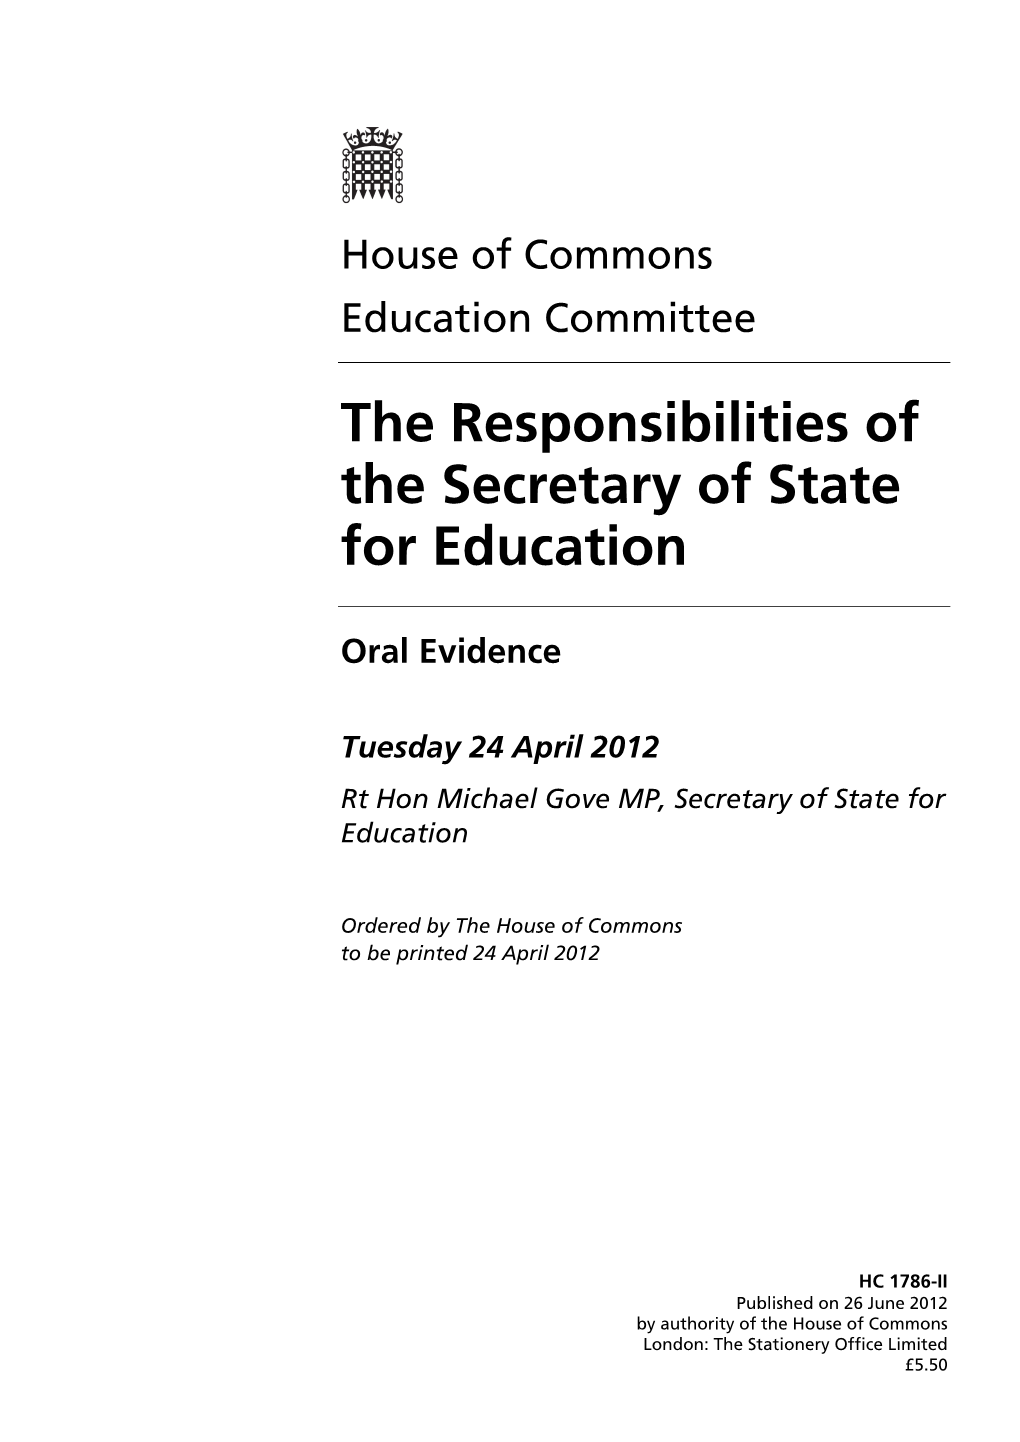 The Responsibilities of the Secretary of State for Education